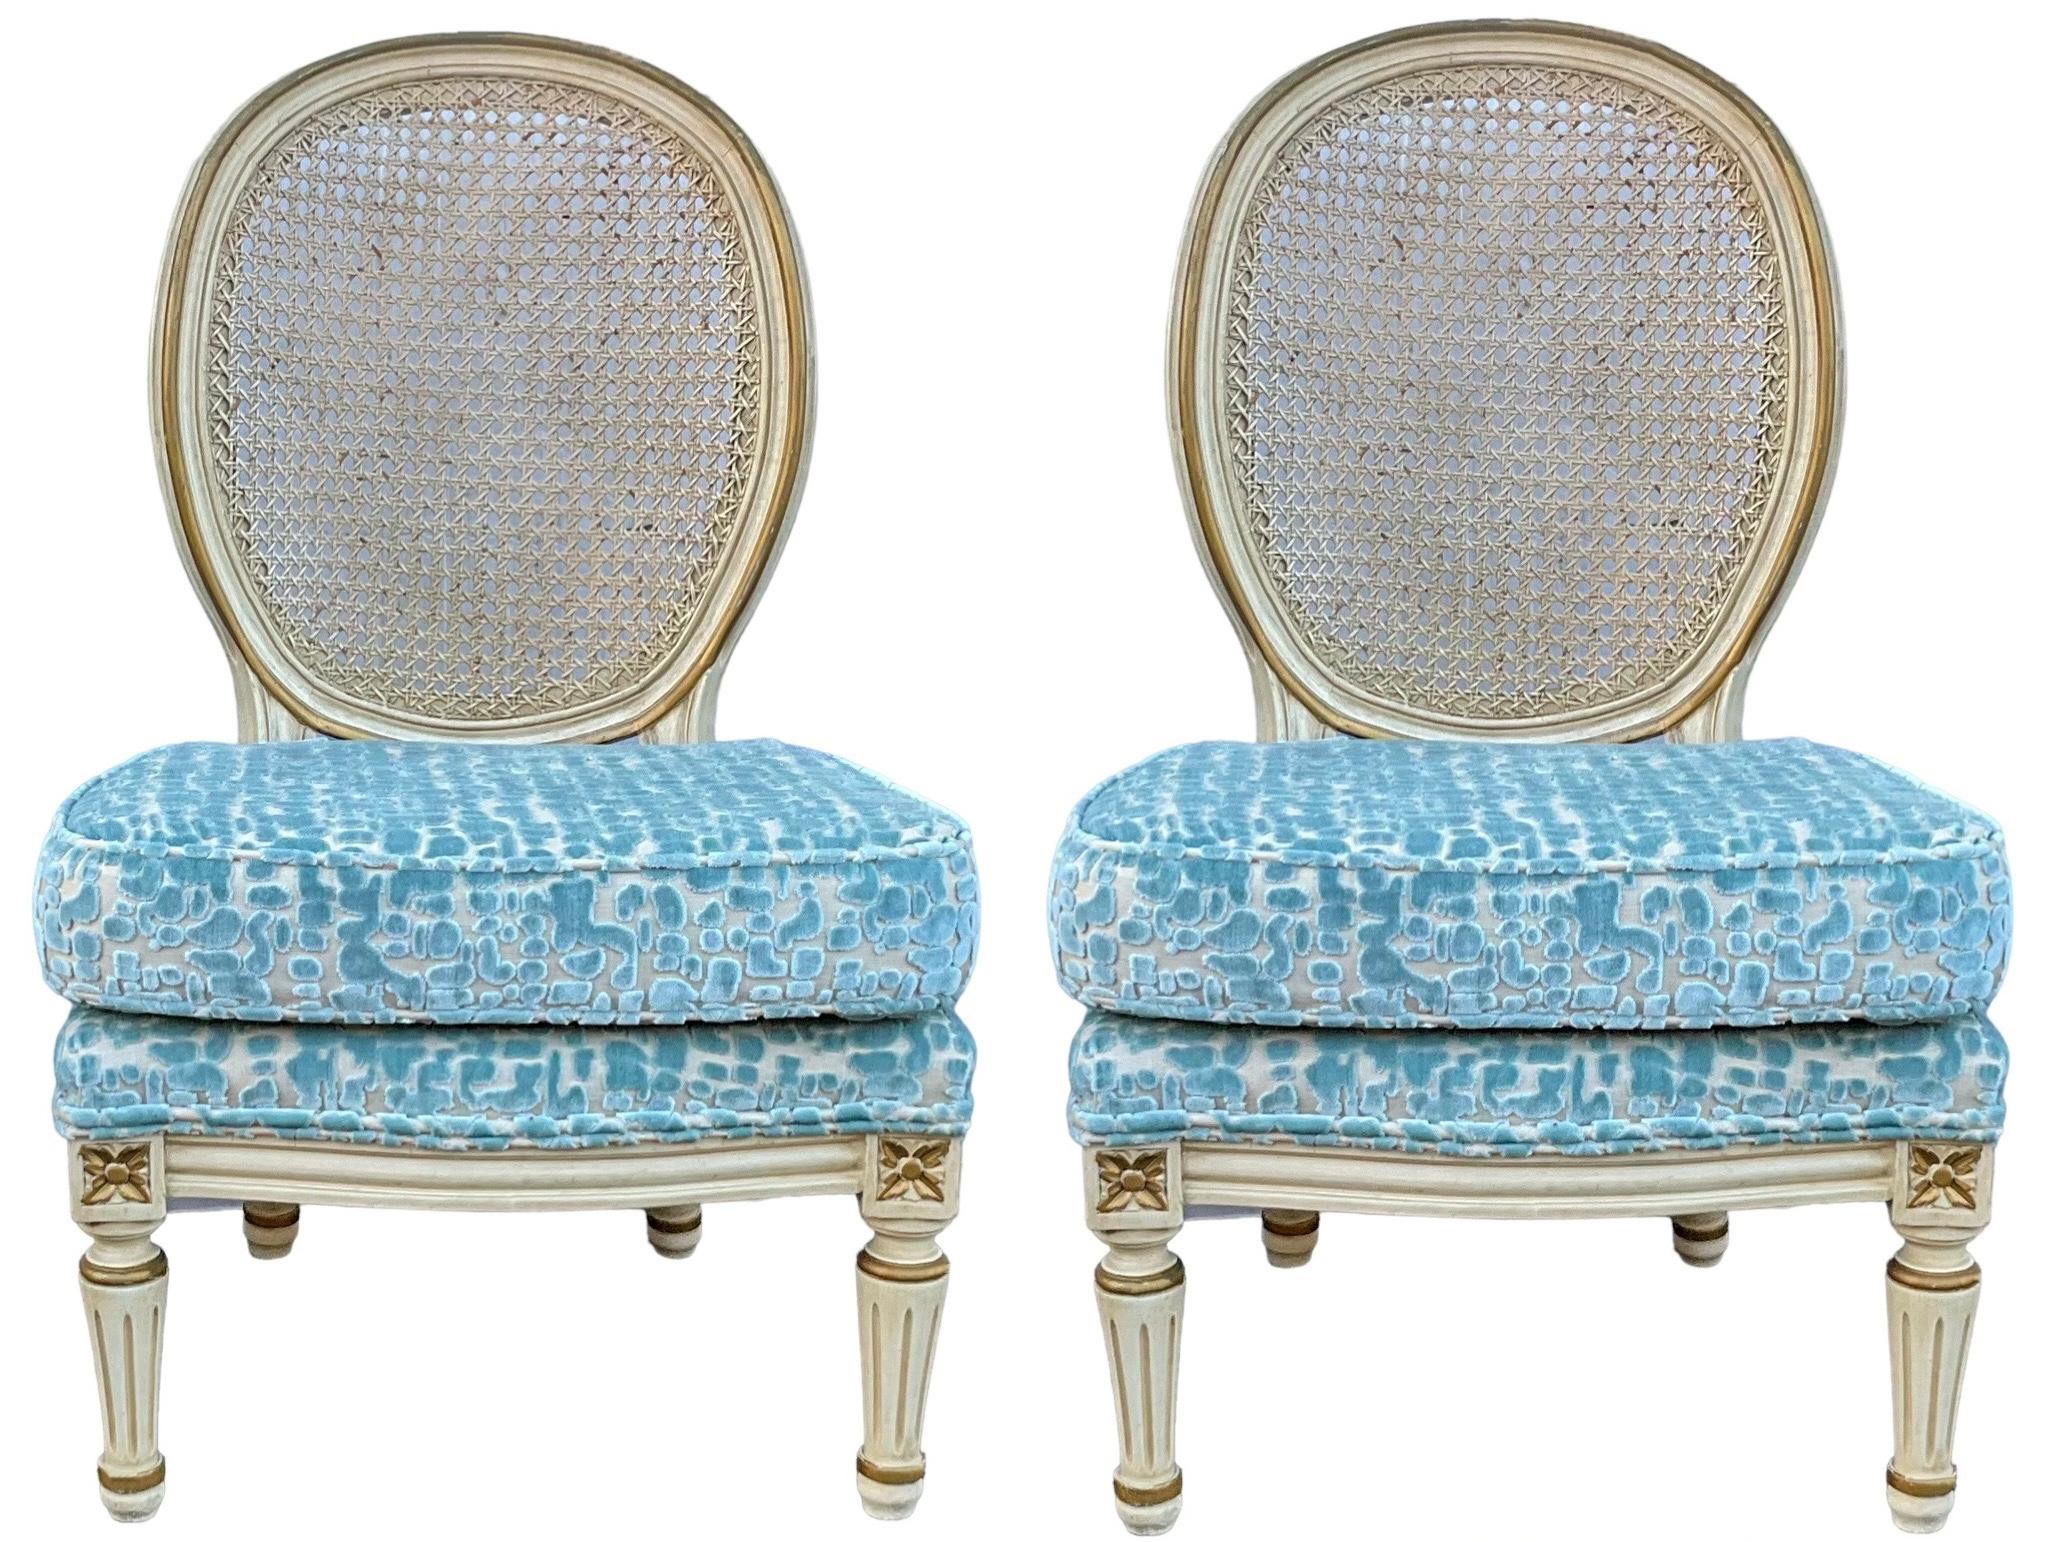 Hollywood Regency Era French Style Painted Slipper Chairs In Cut Velvet -Pair In Good Condition For Sale In Kennesaw, GA